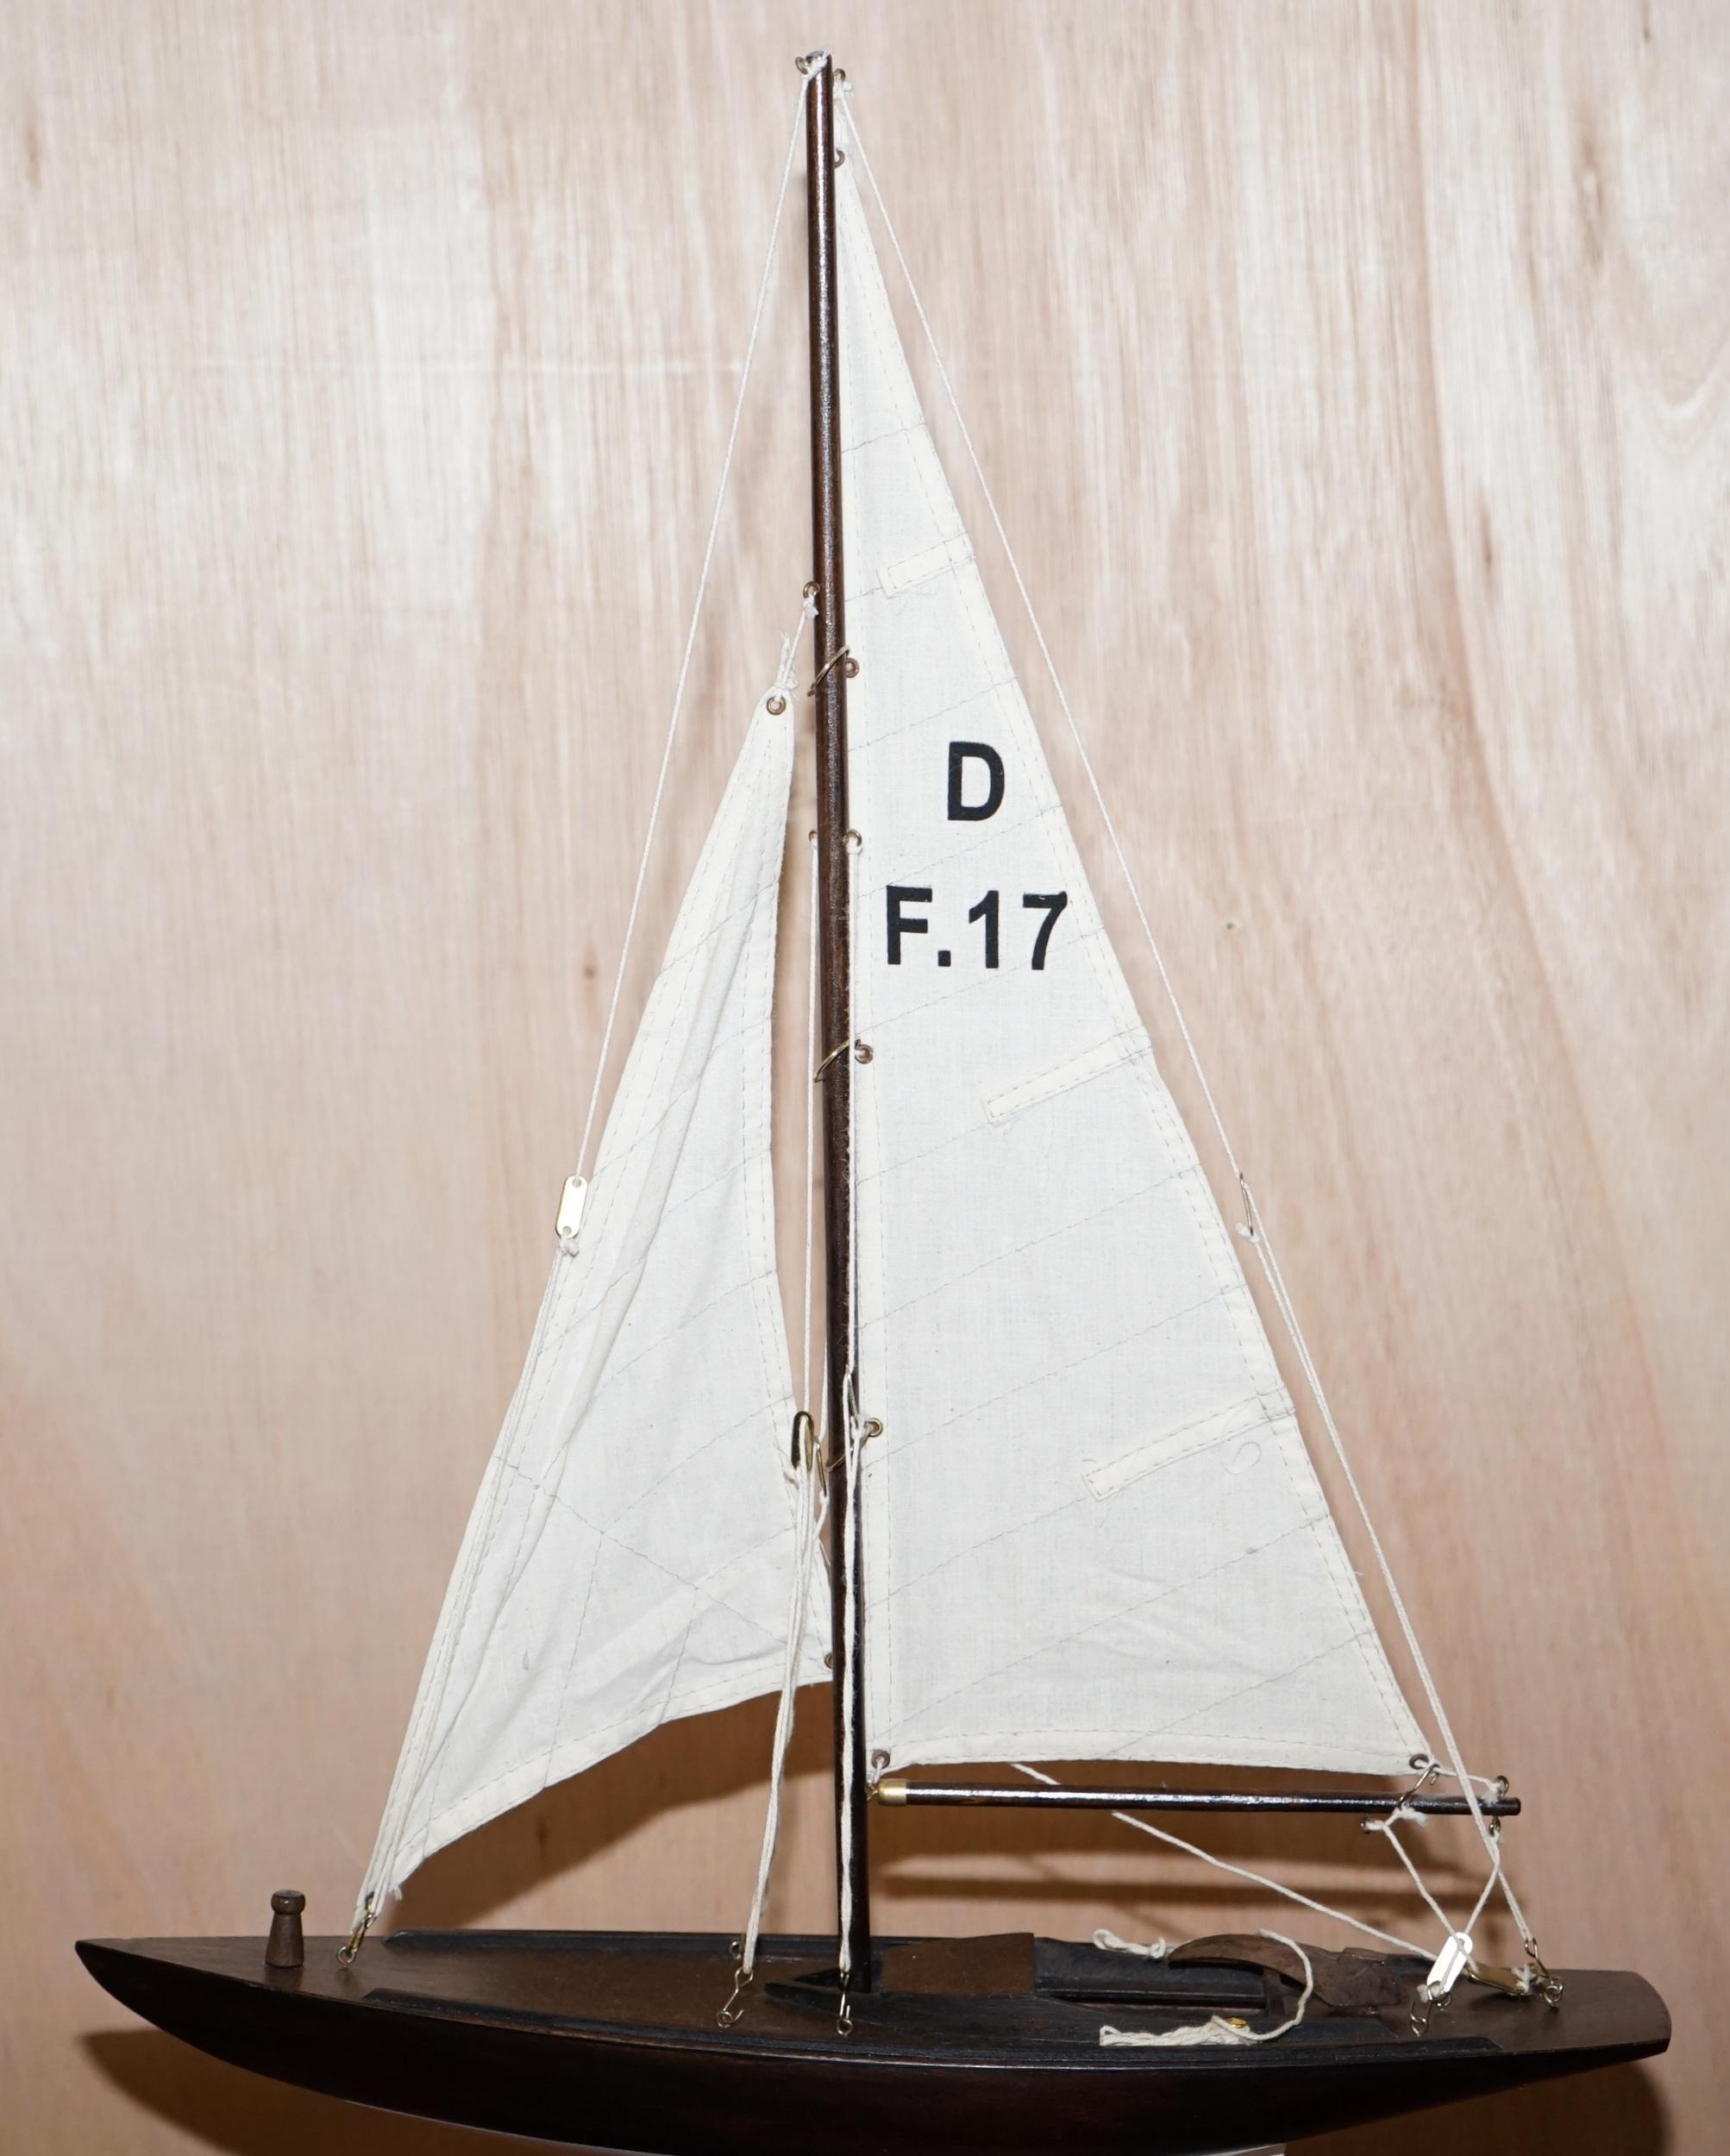 20th Century Dragon Olympic Sail Racer One Medium Hand Carved Wooden Model D F.17 Sailboat